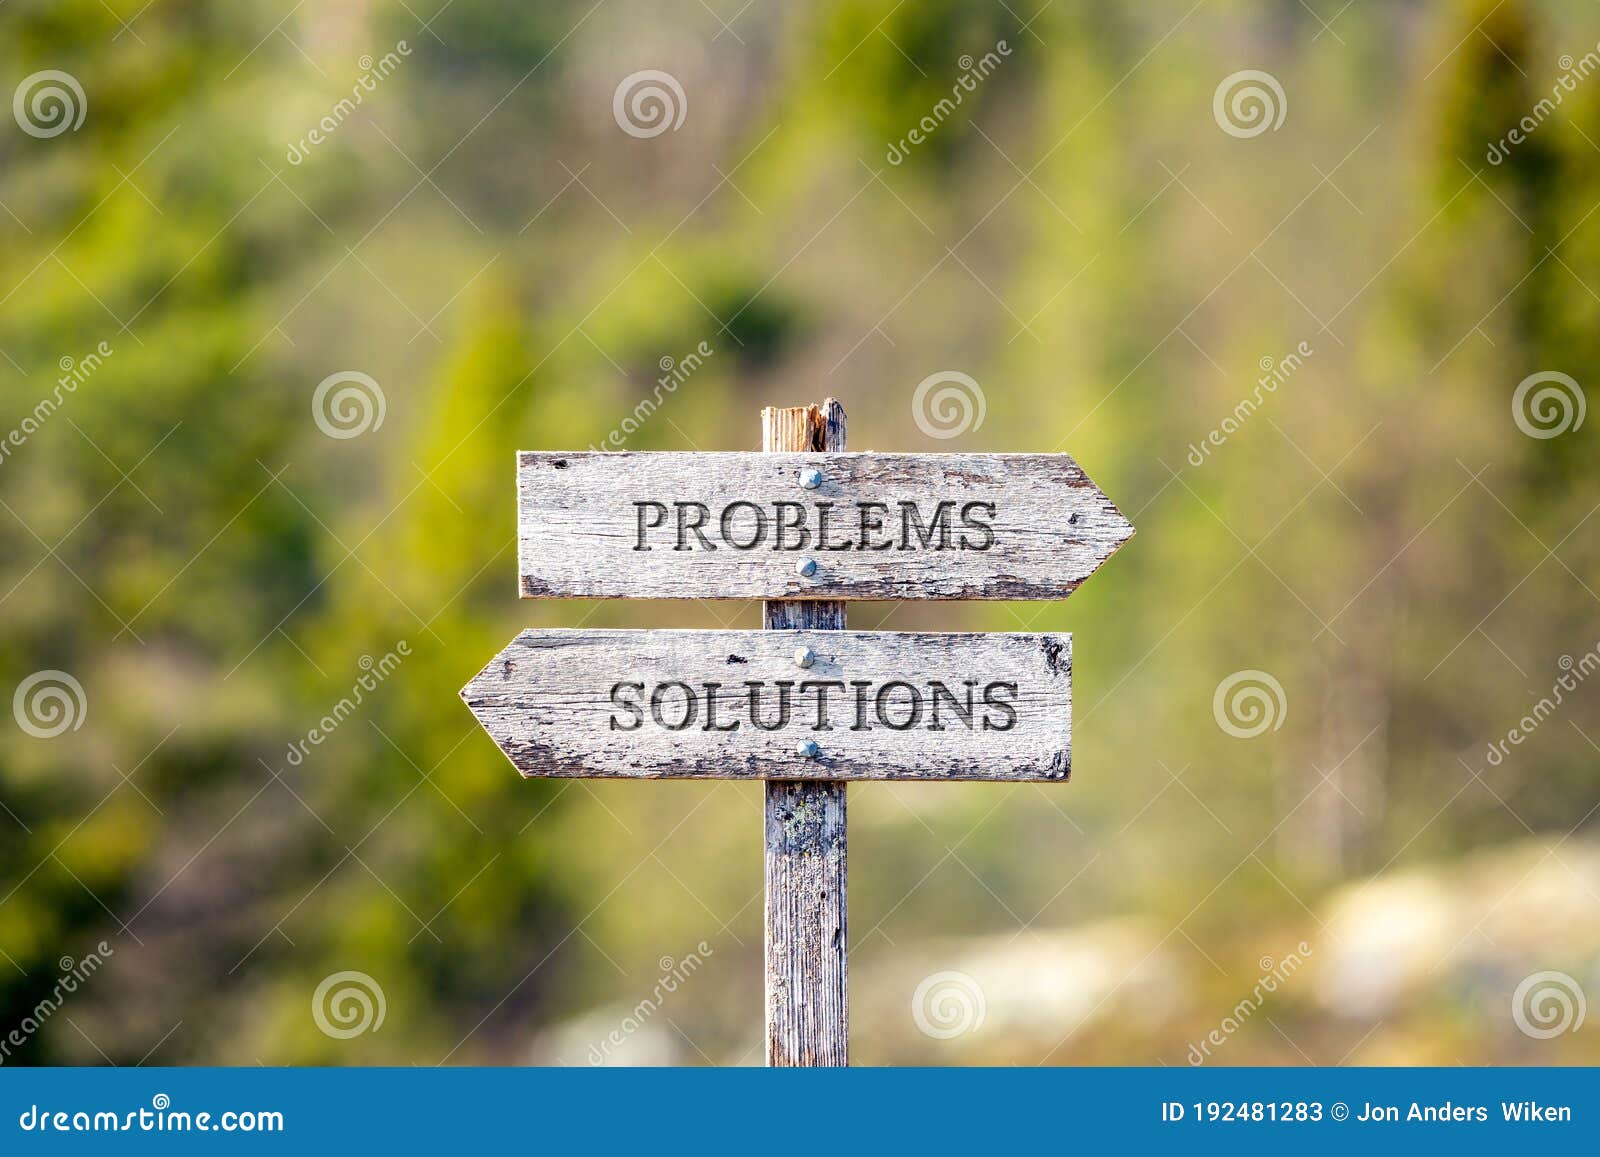 problems solutions text carved on wooden signpost outdoors in nature